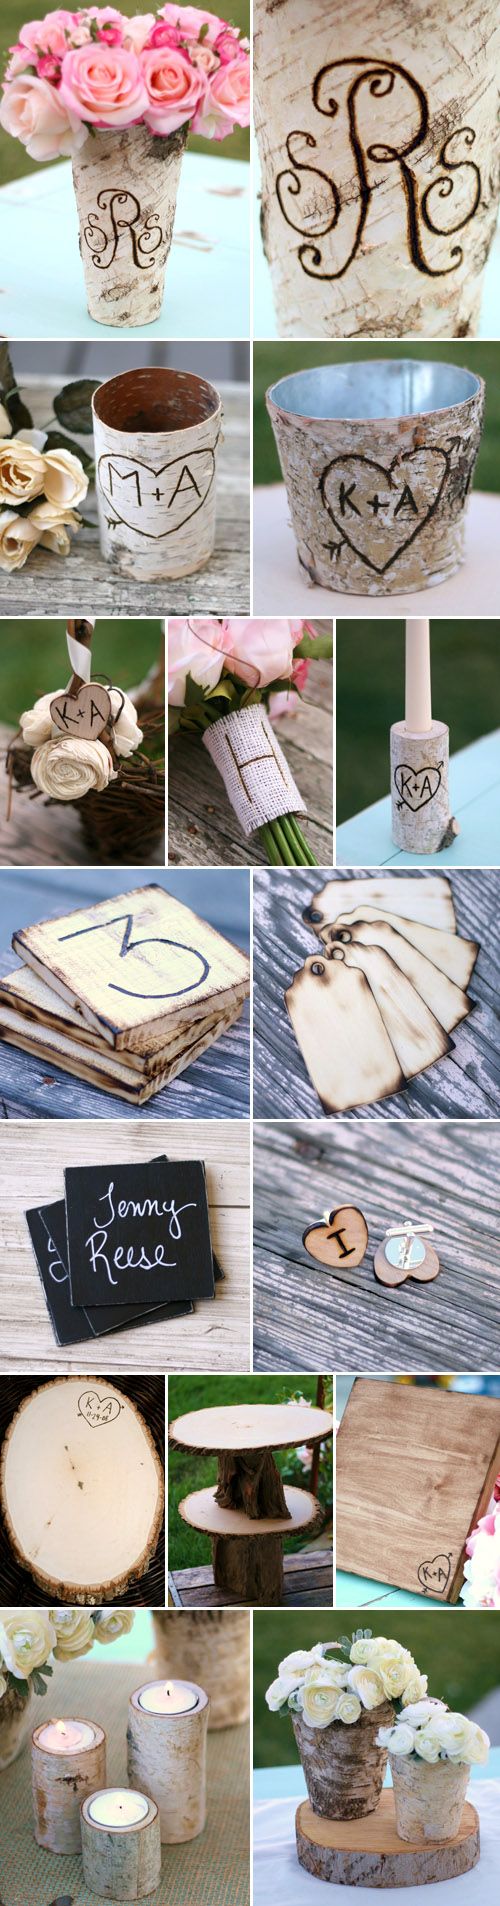 Rustic Woodland Wedding Decor and Accessories